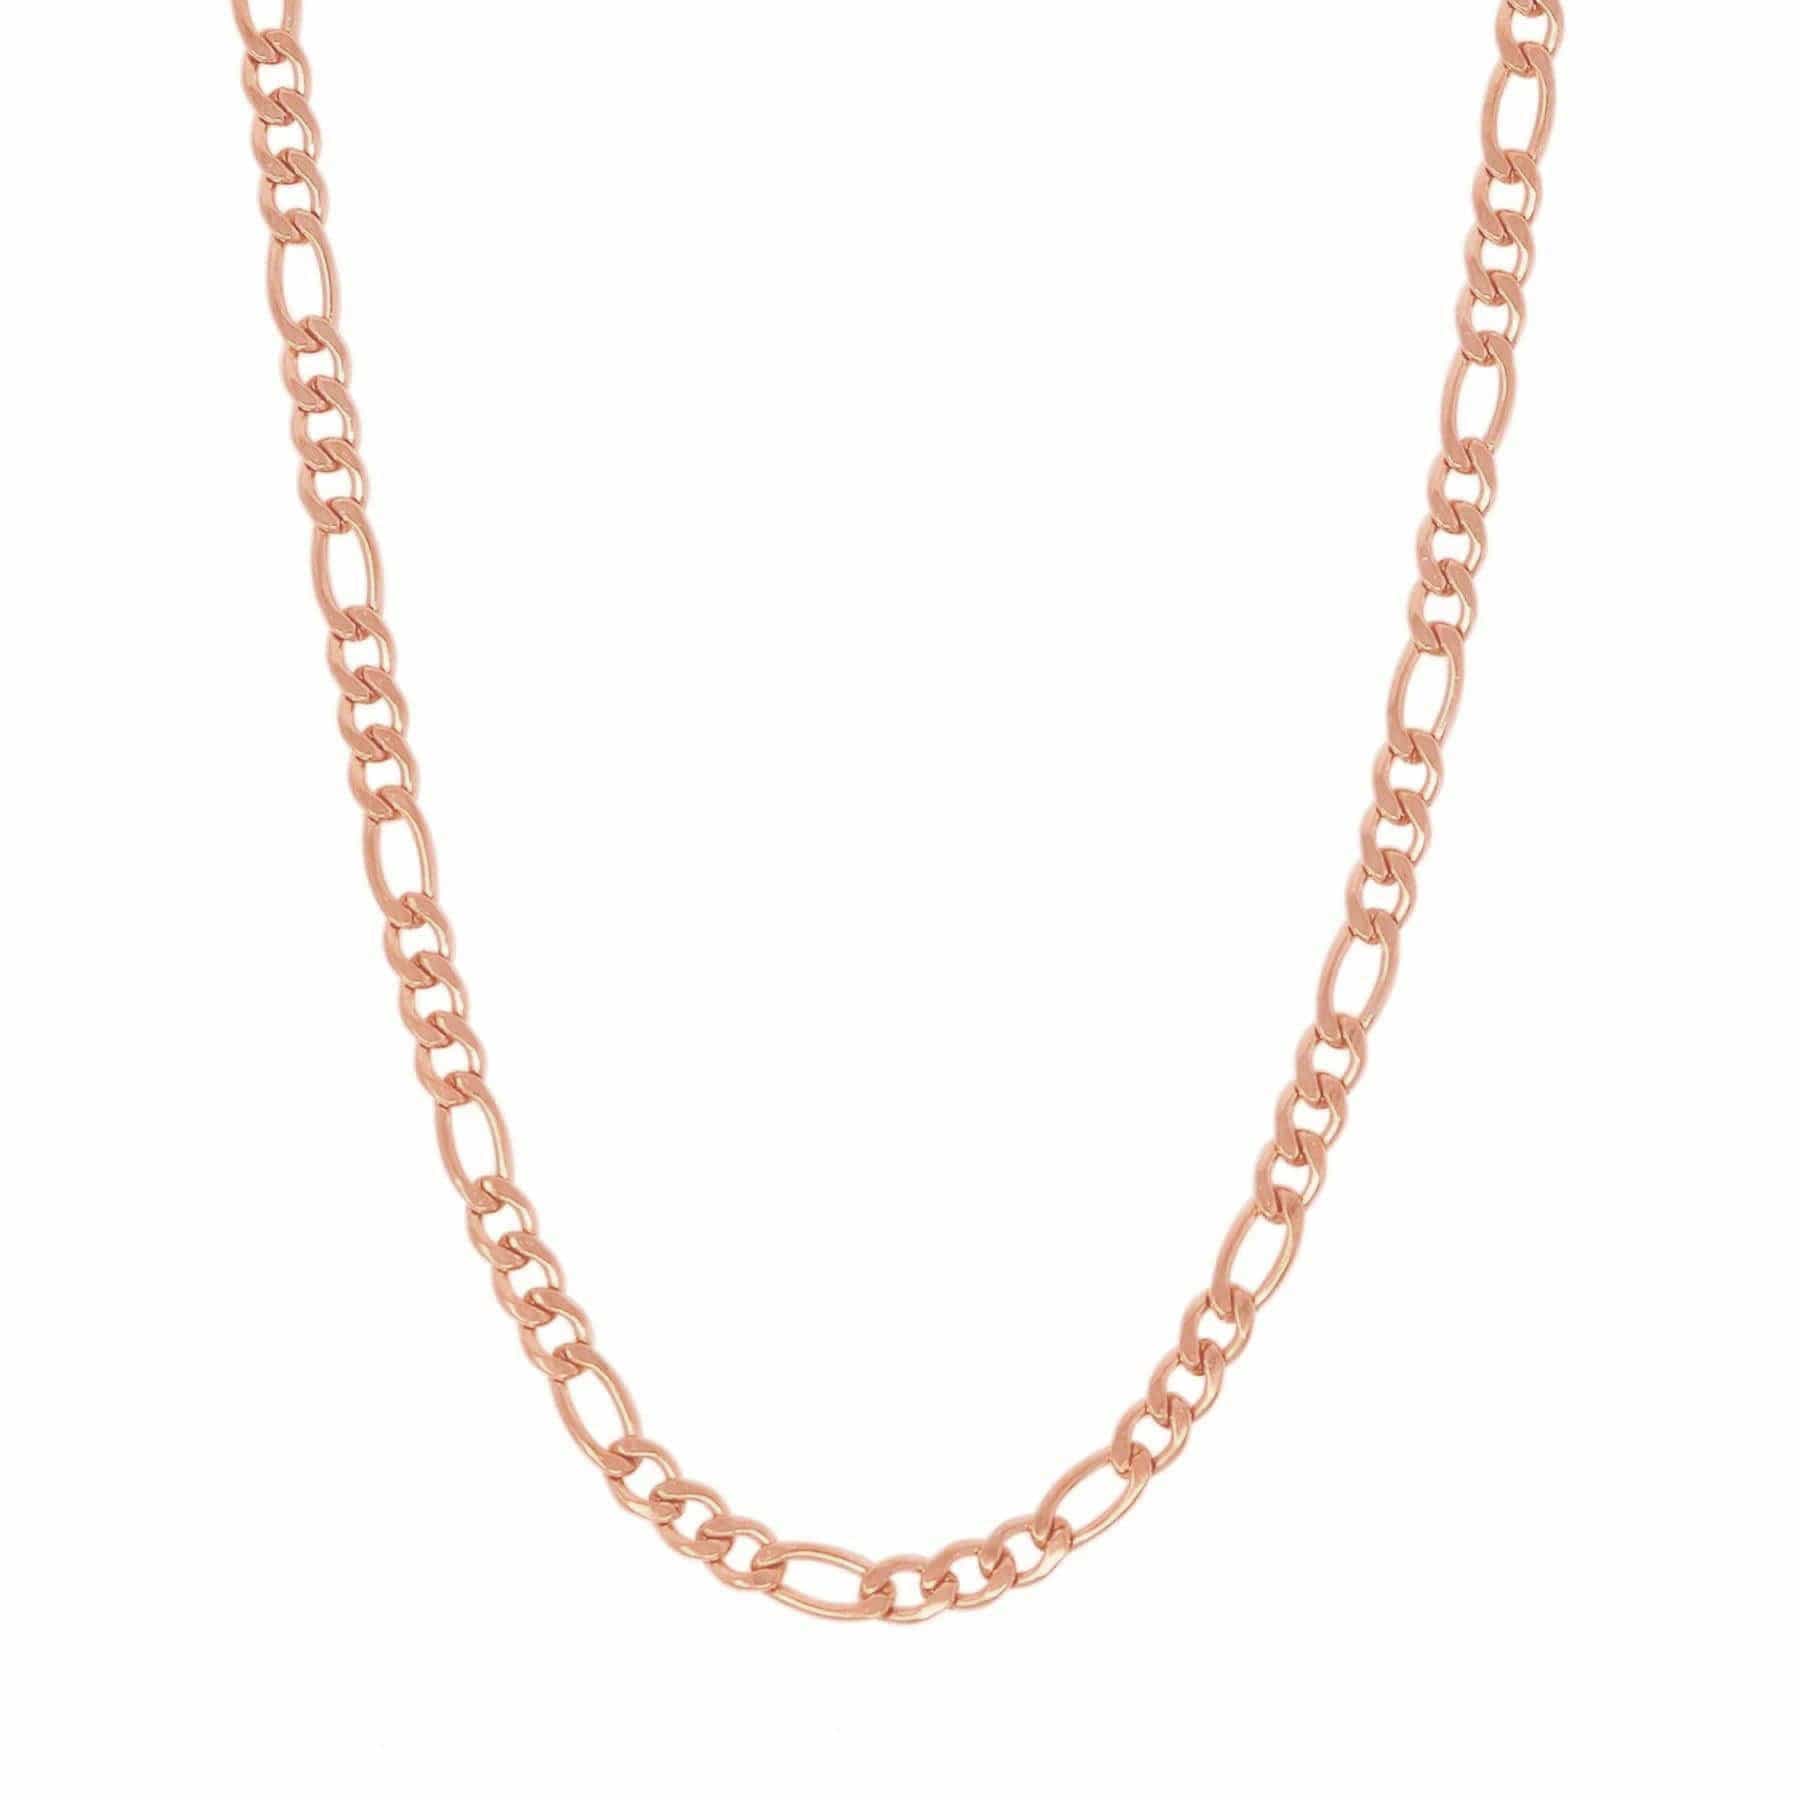 BohoMoon Stainless Steel Figaro Chain Necklace Rose Gold / 18"